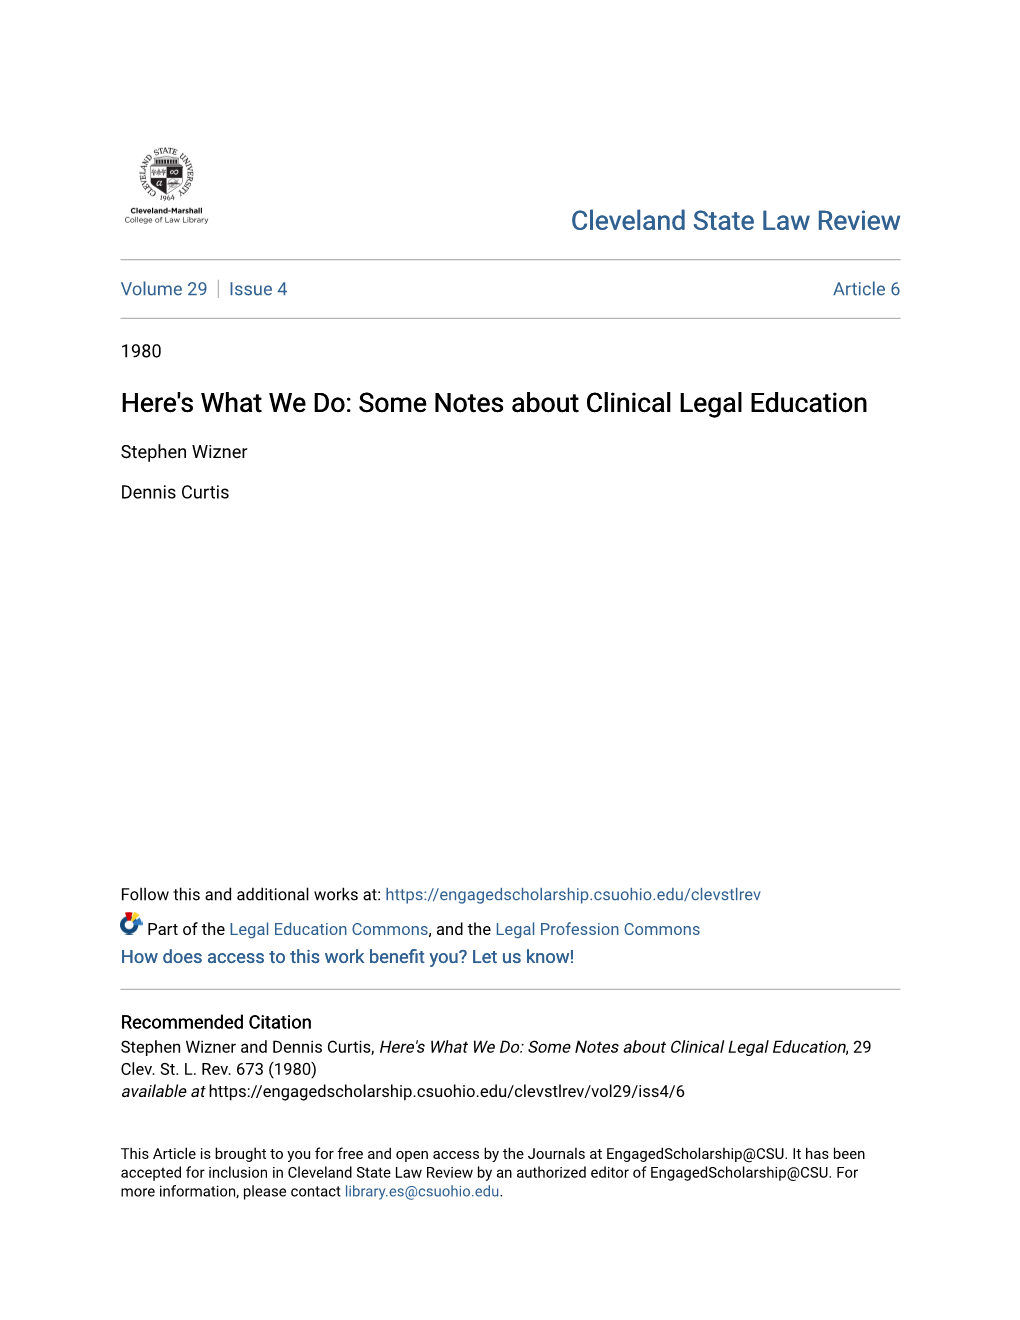 Here's What We Do: Some Notes About Clinical Legal Education